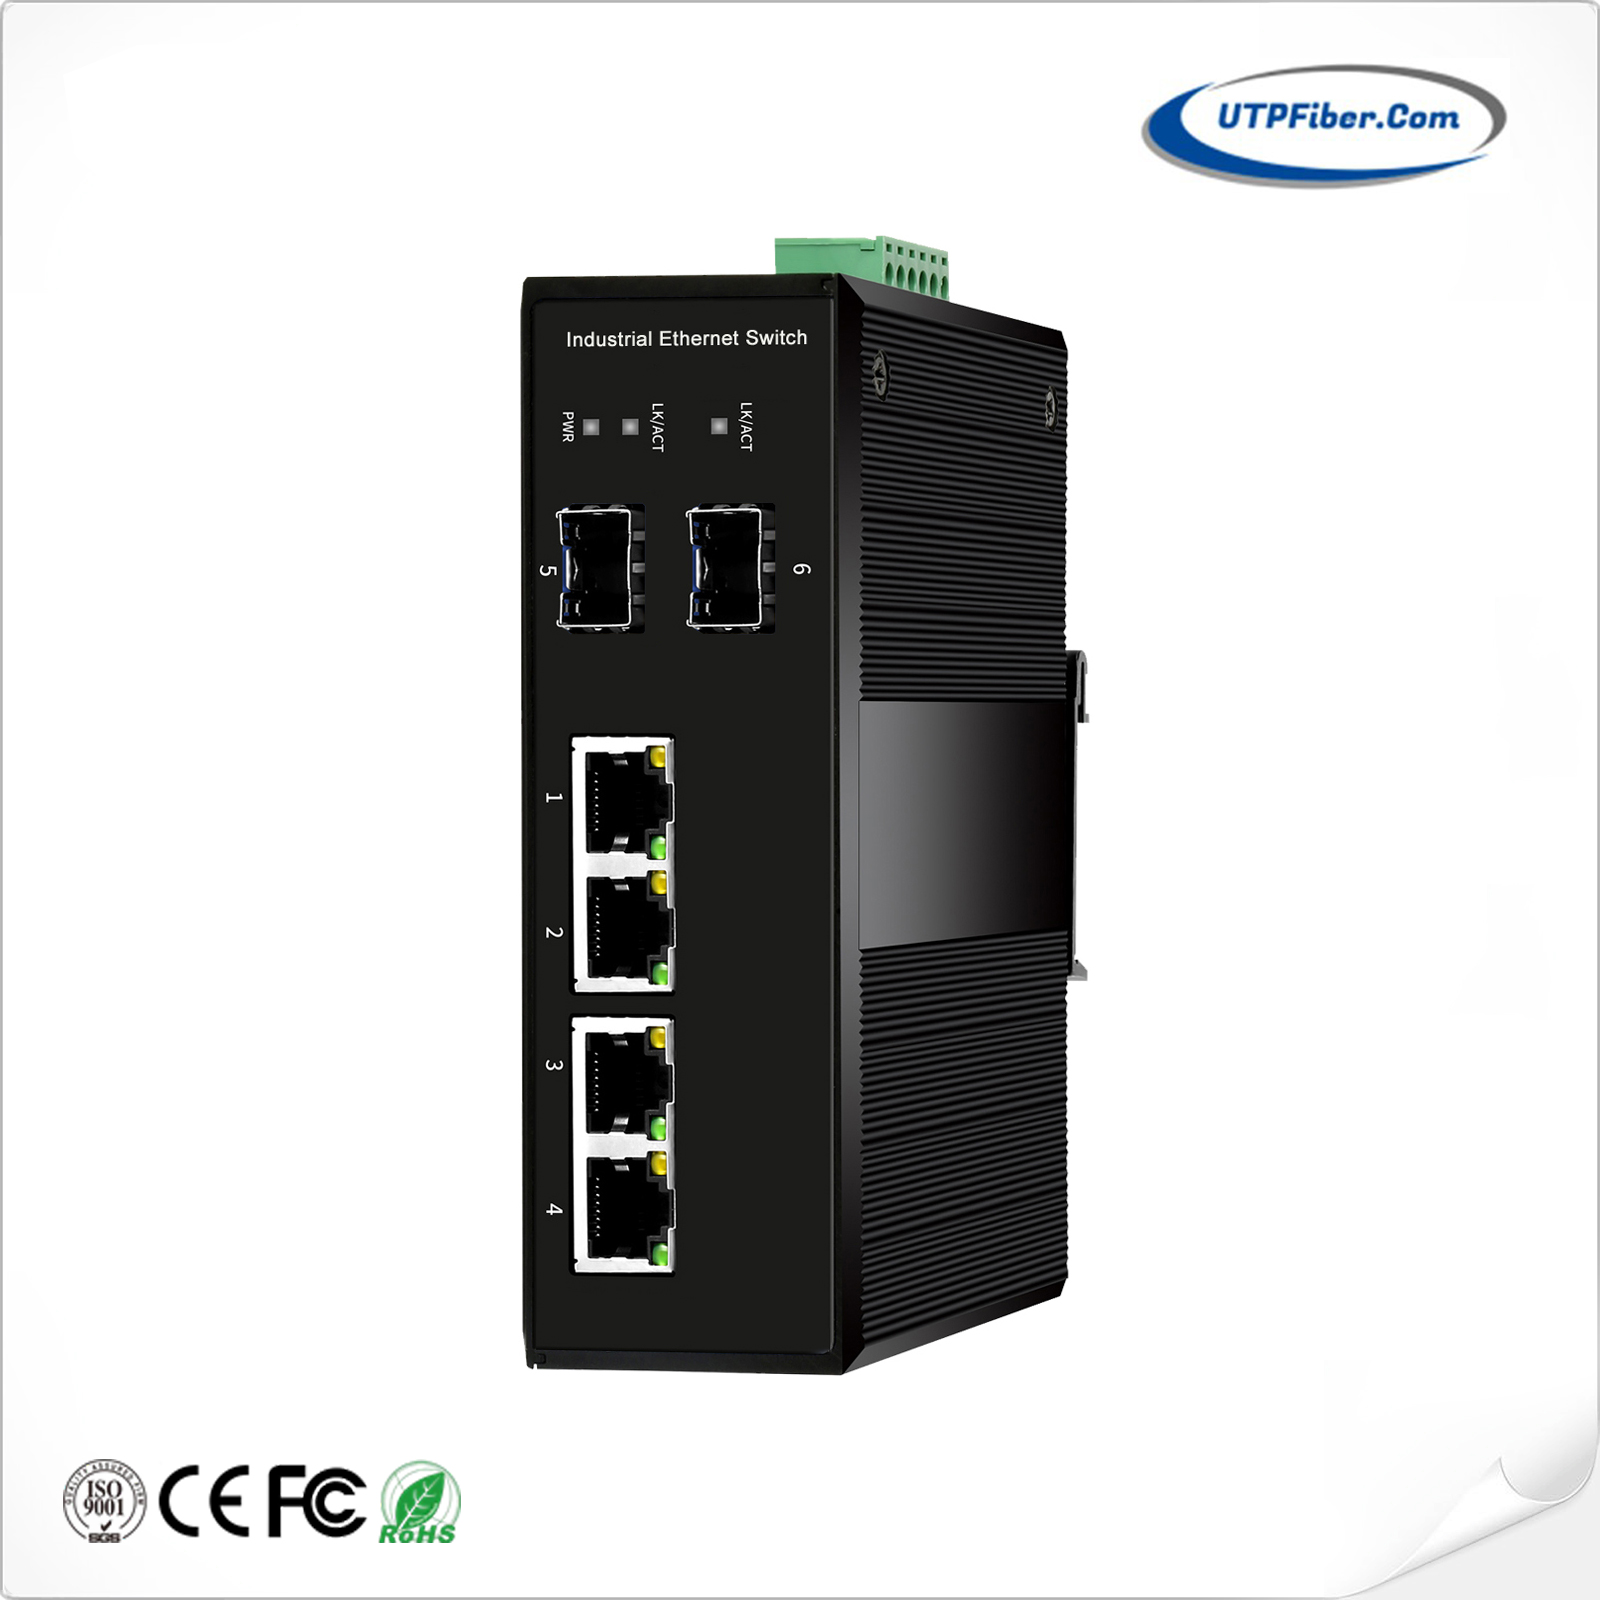 L2+ Industrial 4-Port 10/100/1000T 802.3at PoE + 2-Port 100/1000X SFP Managed Ethernet Switch